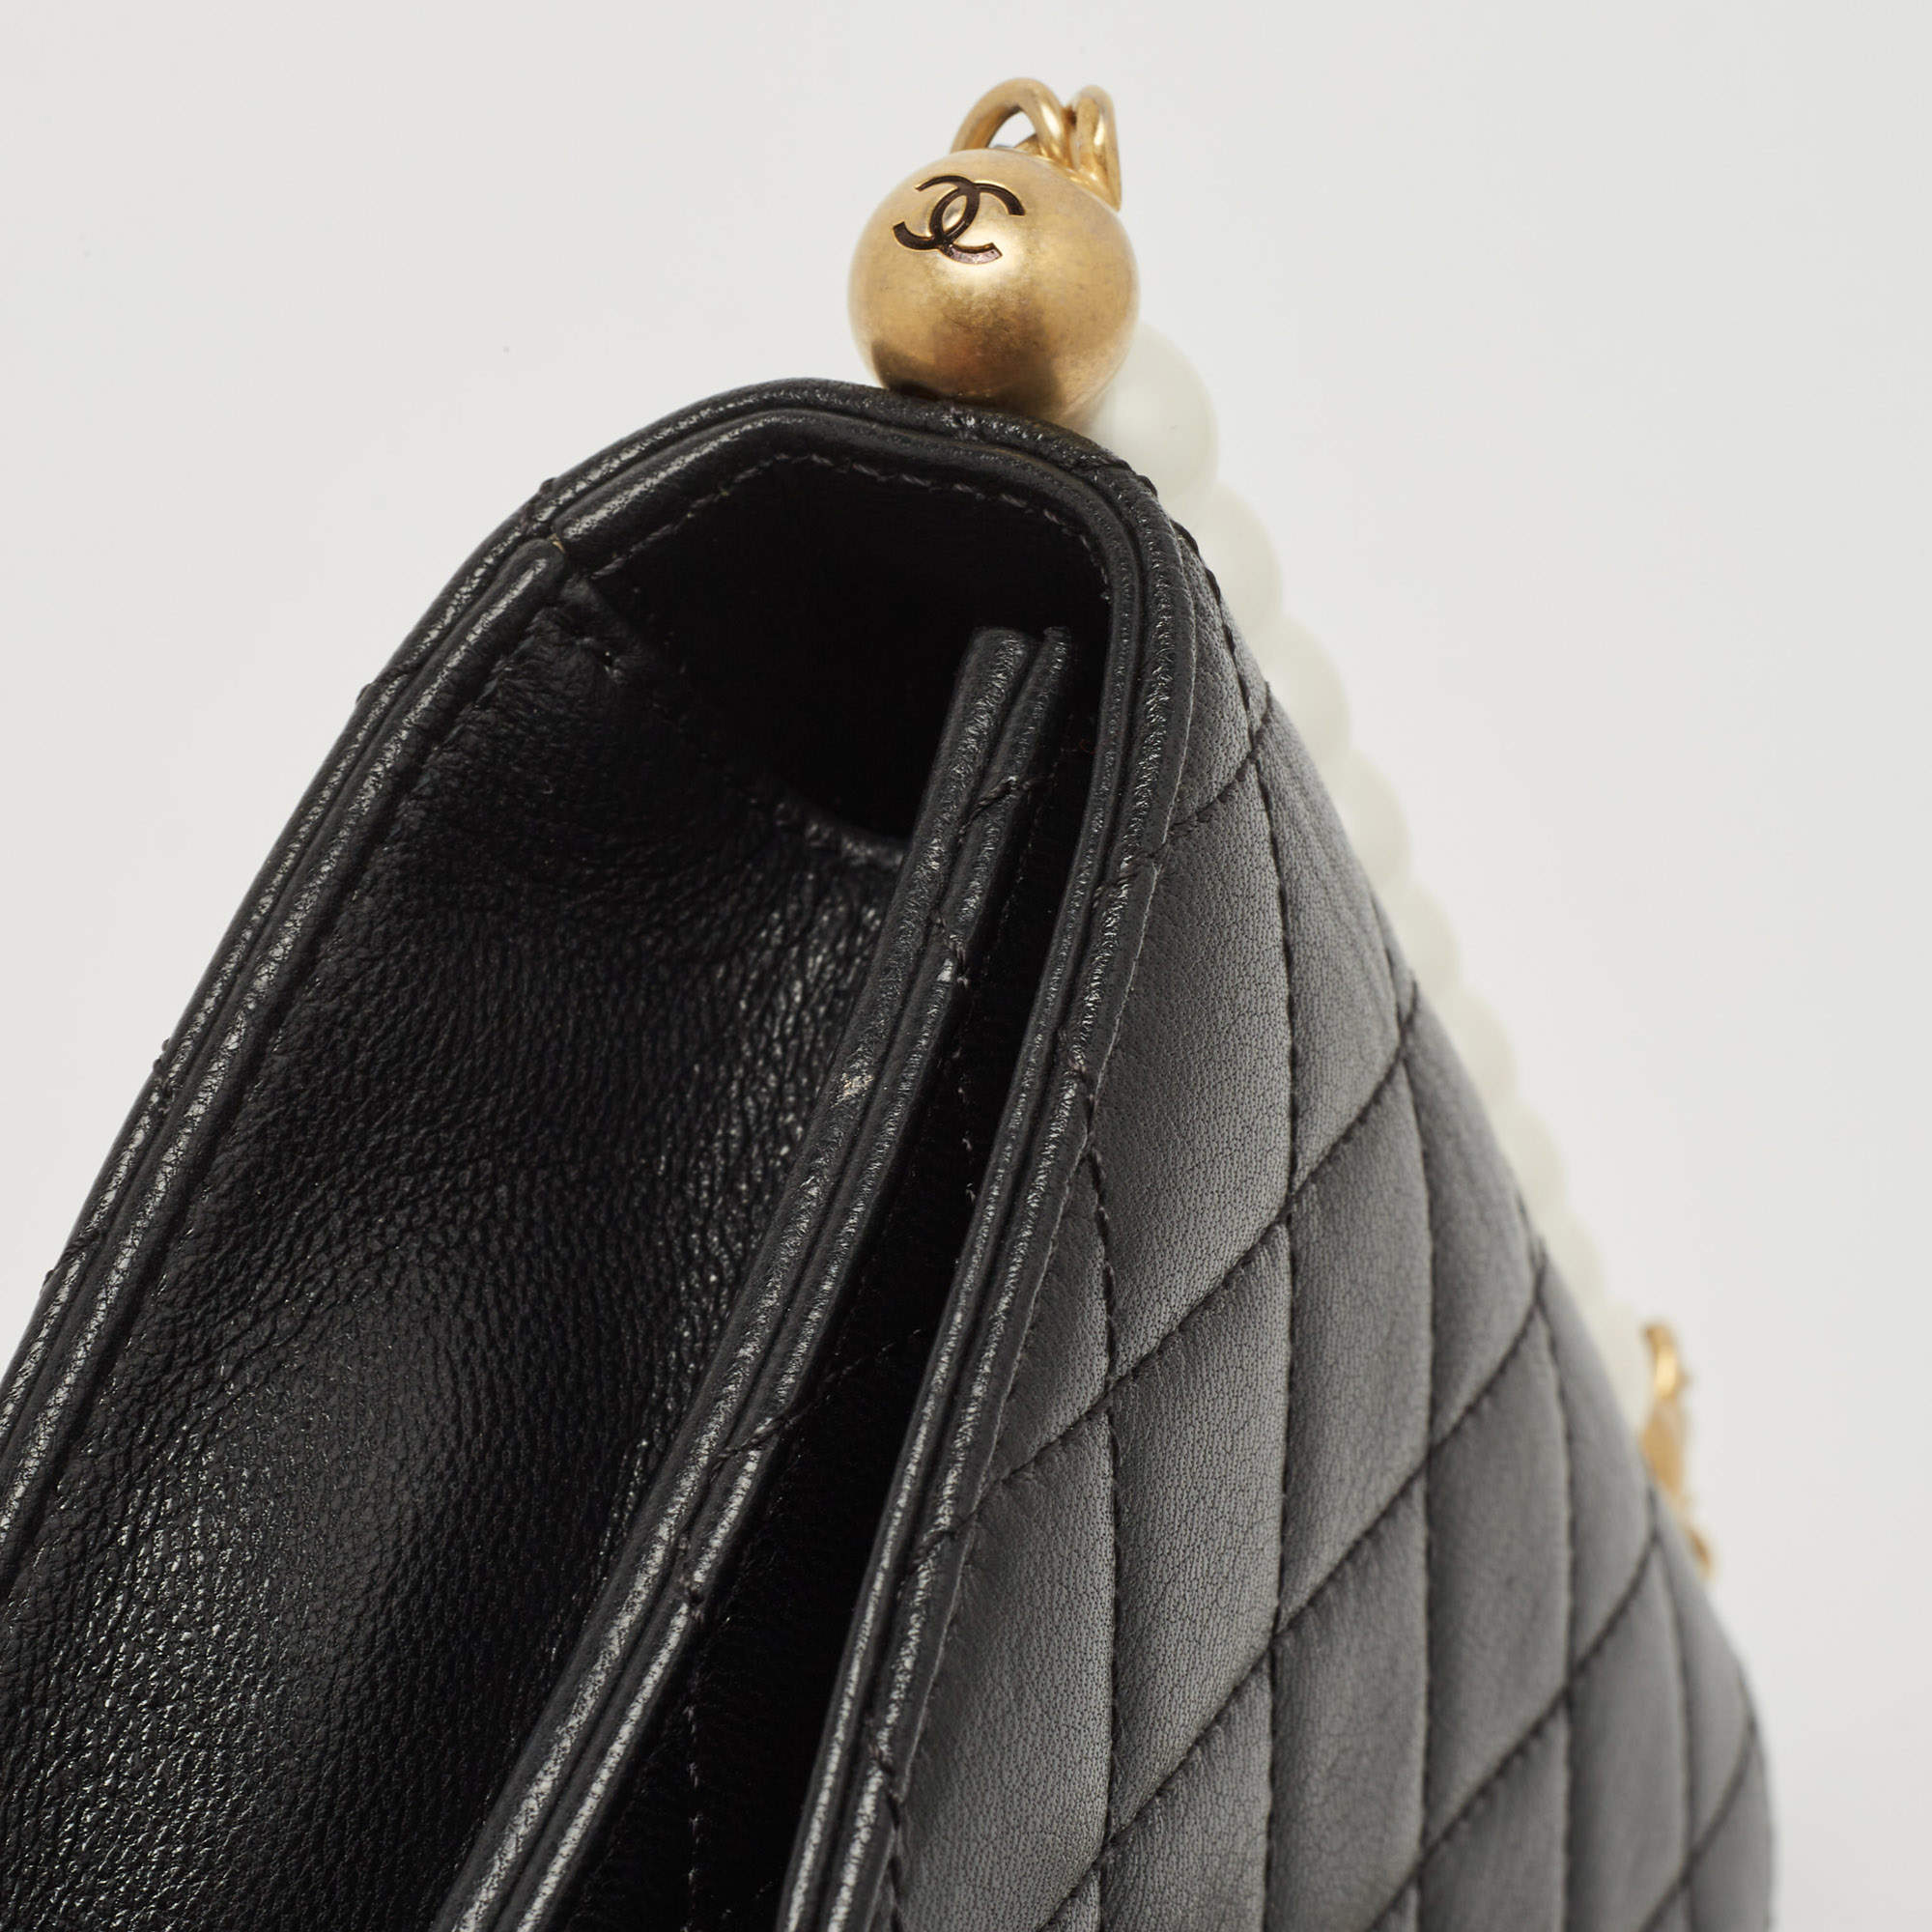 Chanel Black Quilted Leather Chic Pearls Flap Bag Chanel